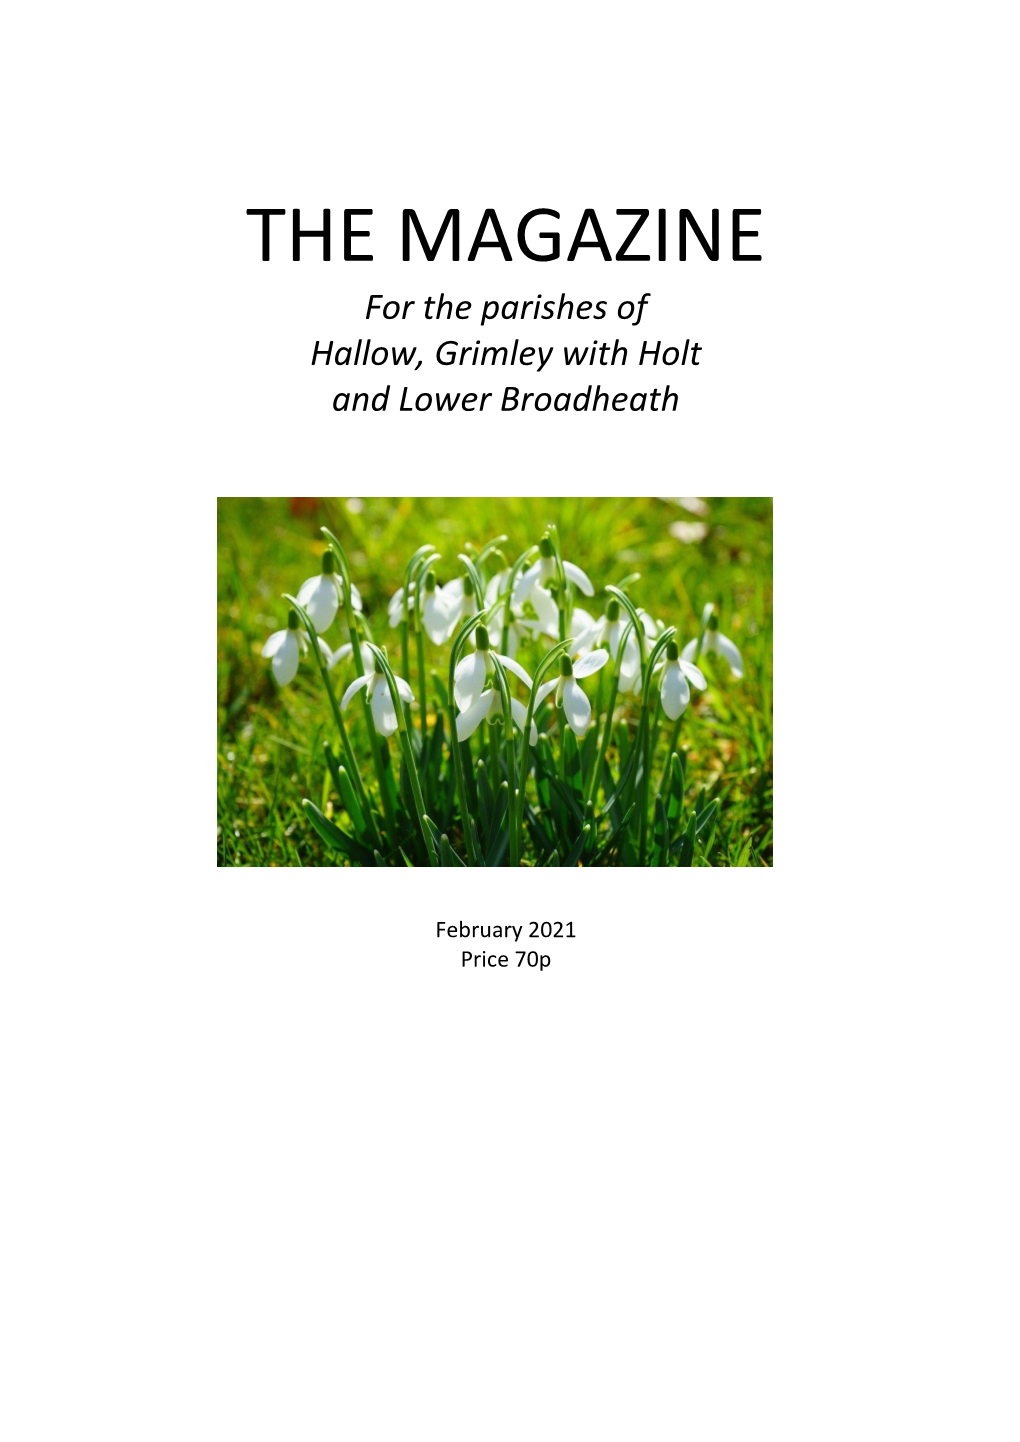 THE MAGAZINE for the Parishes of Hallow, Grimley with Holt and Lower Broadheath